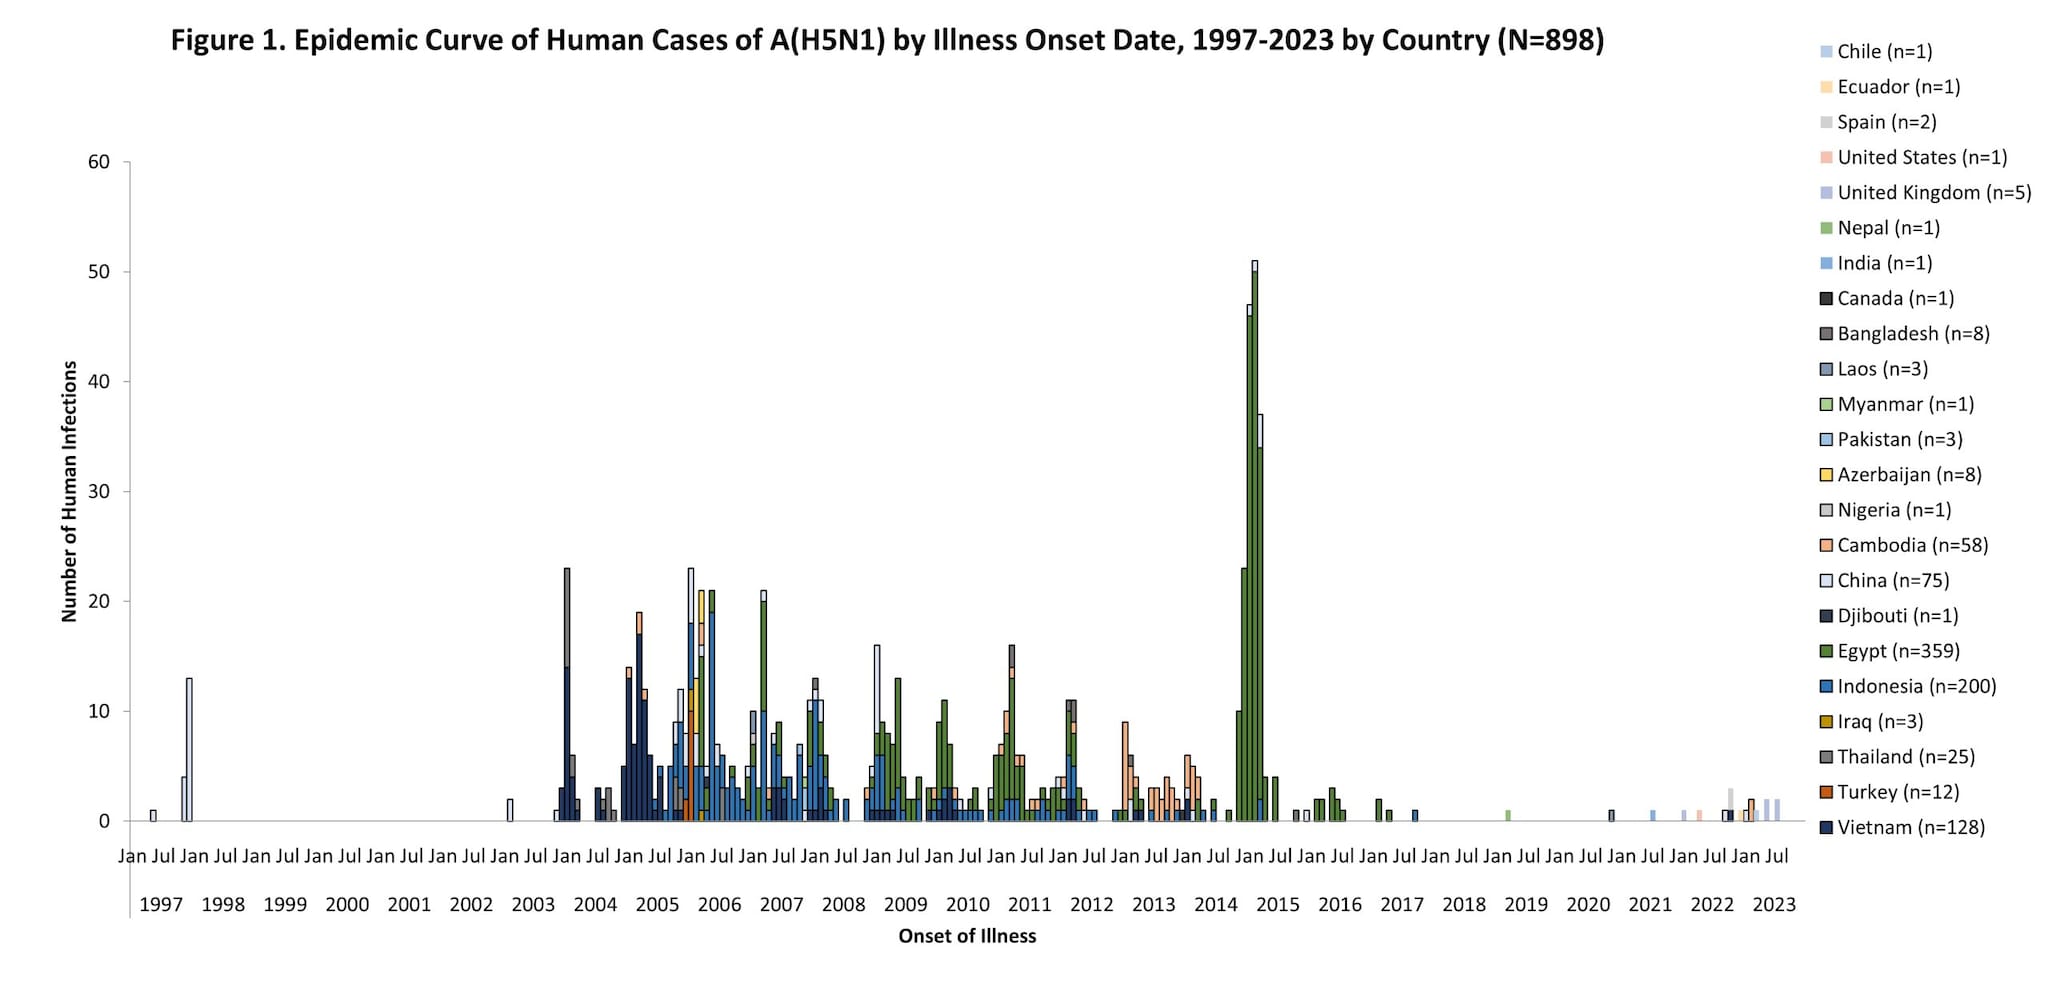 epi curve chart with text Figure 1. Epidemic Curve of Human Cases of A(H5N1) by Illness Onset Date, 1997-2023 by County (N=898)"